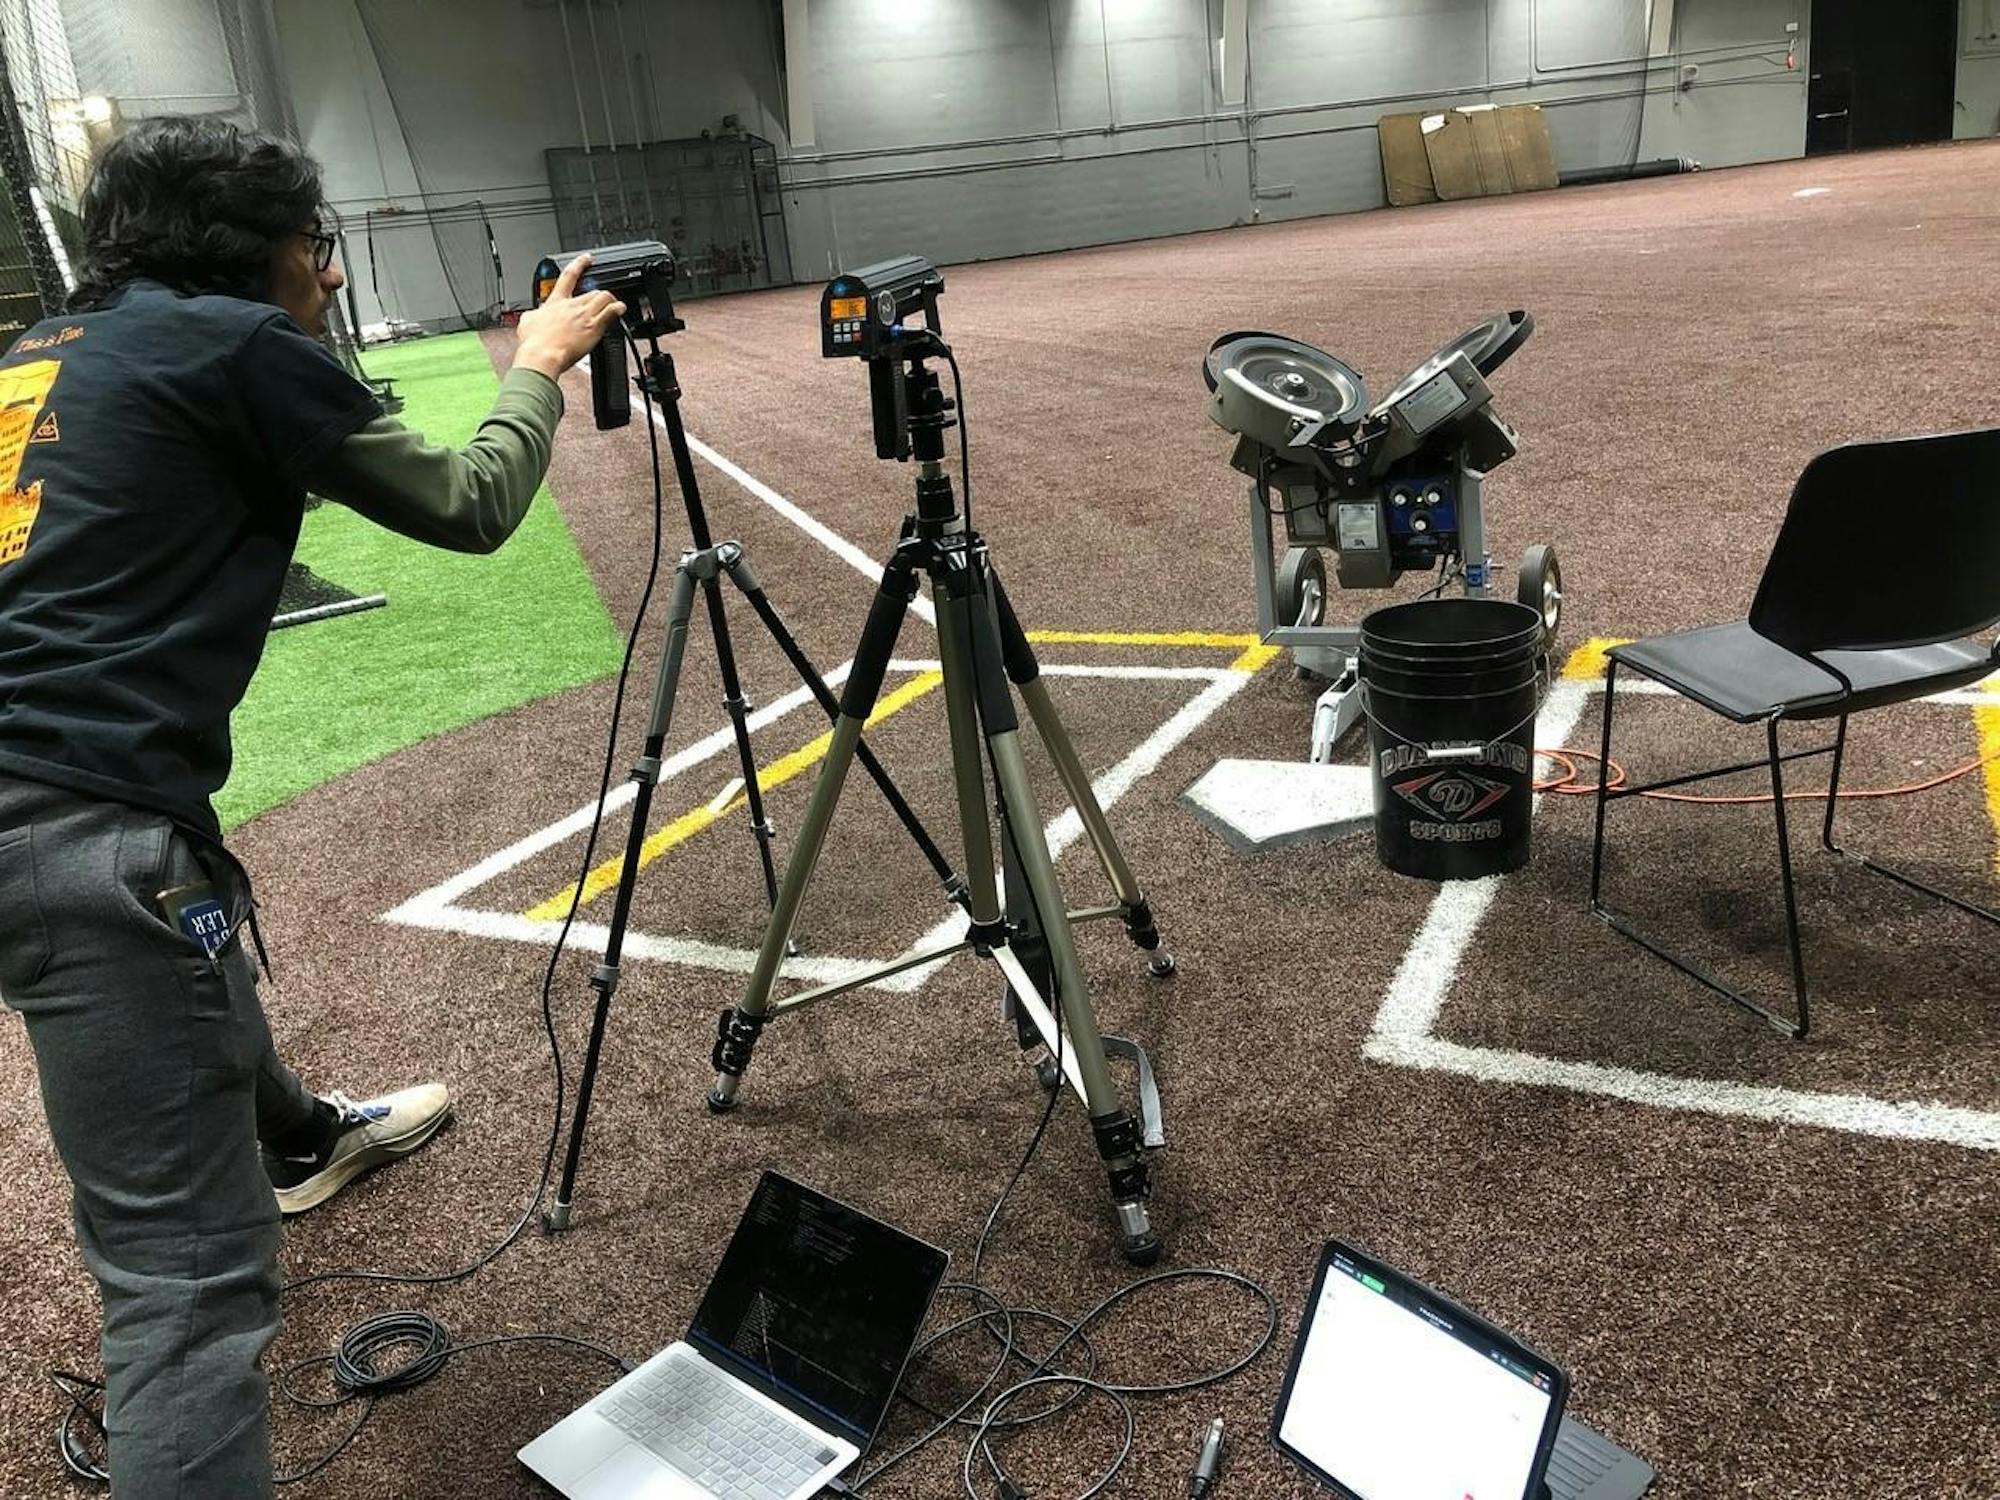 A man working with analytical equipment inside an indoor baseball practice arena. 